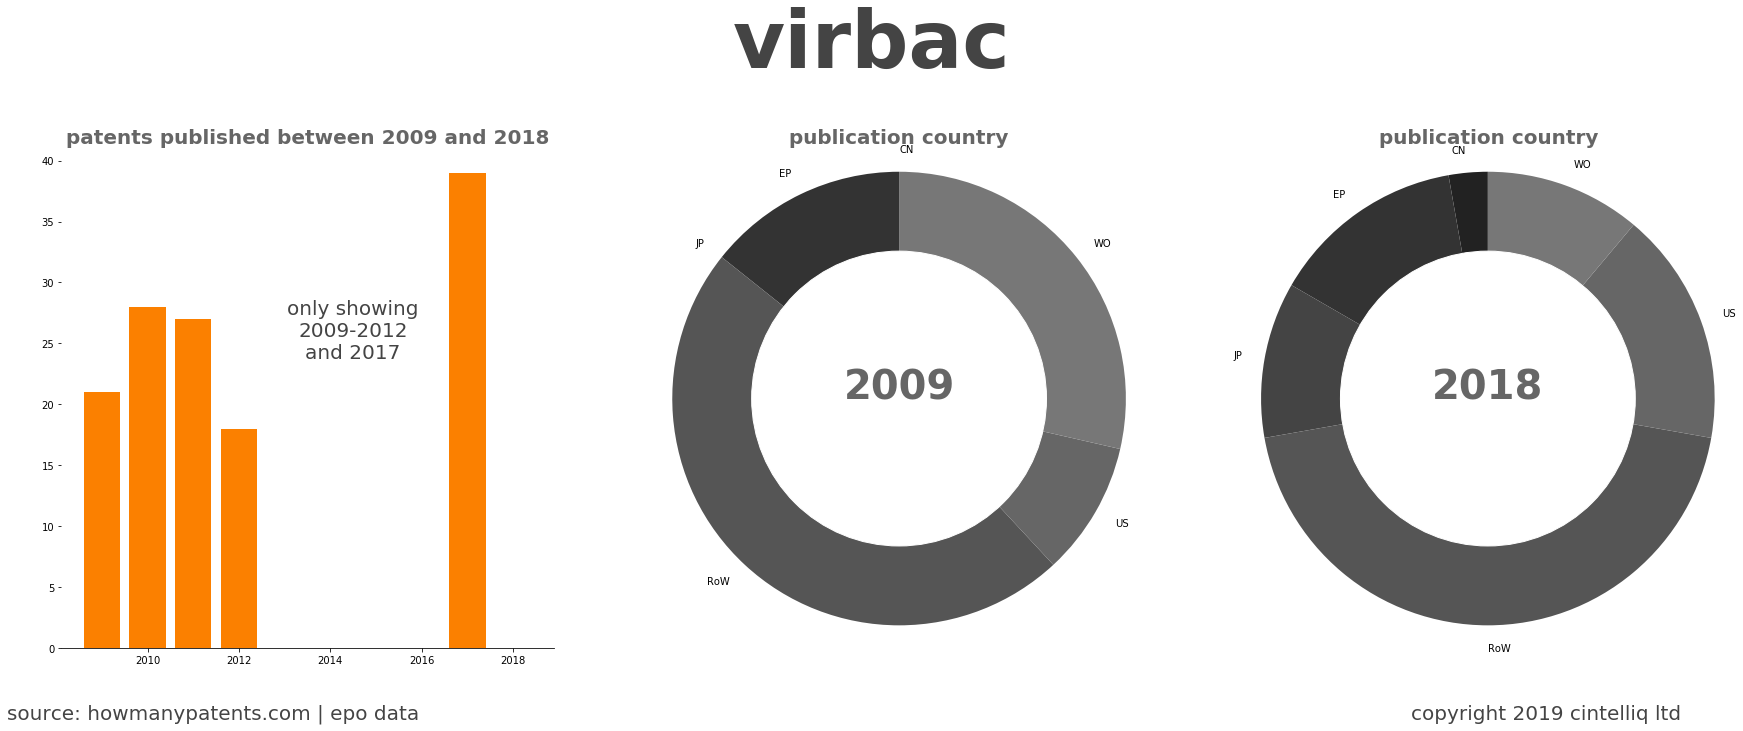 summary of patents for Virbac